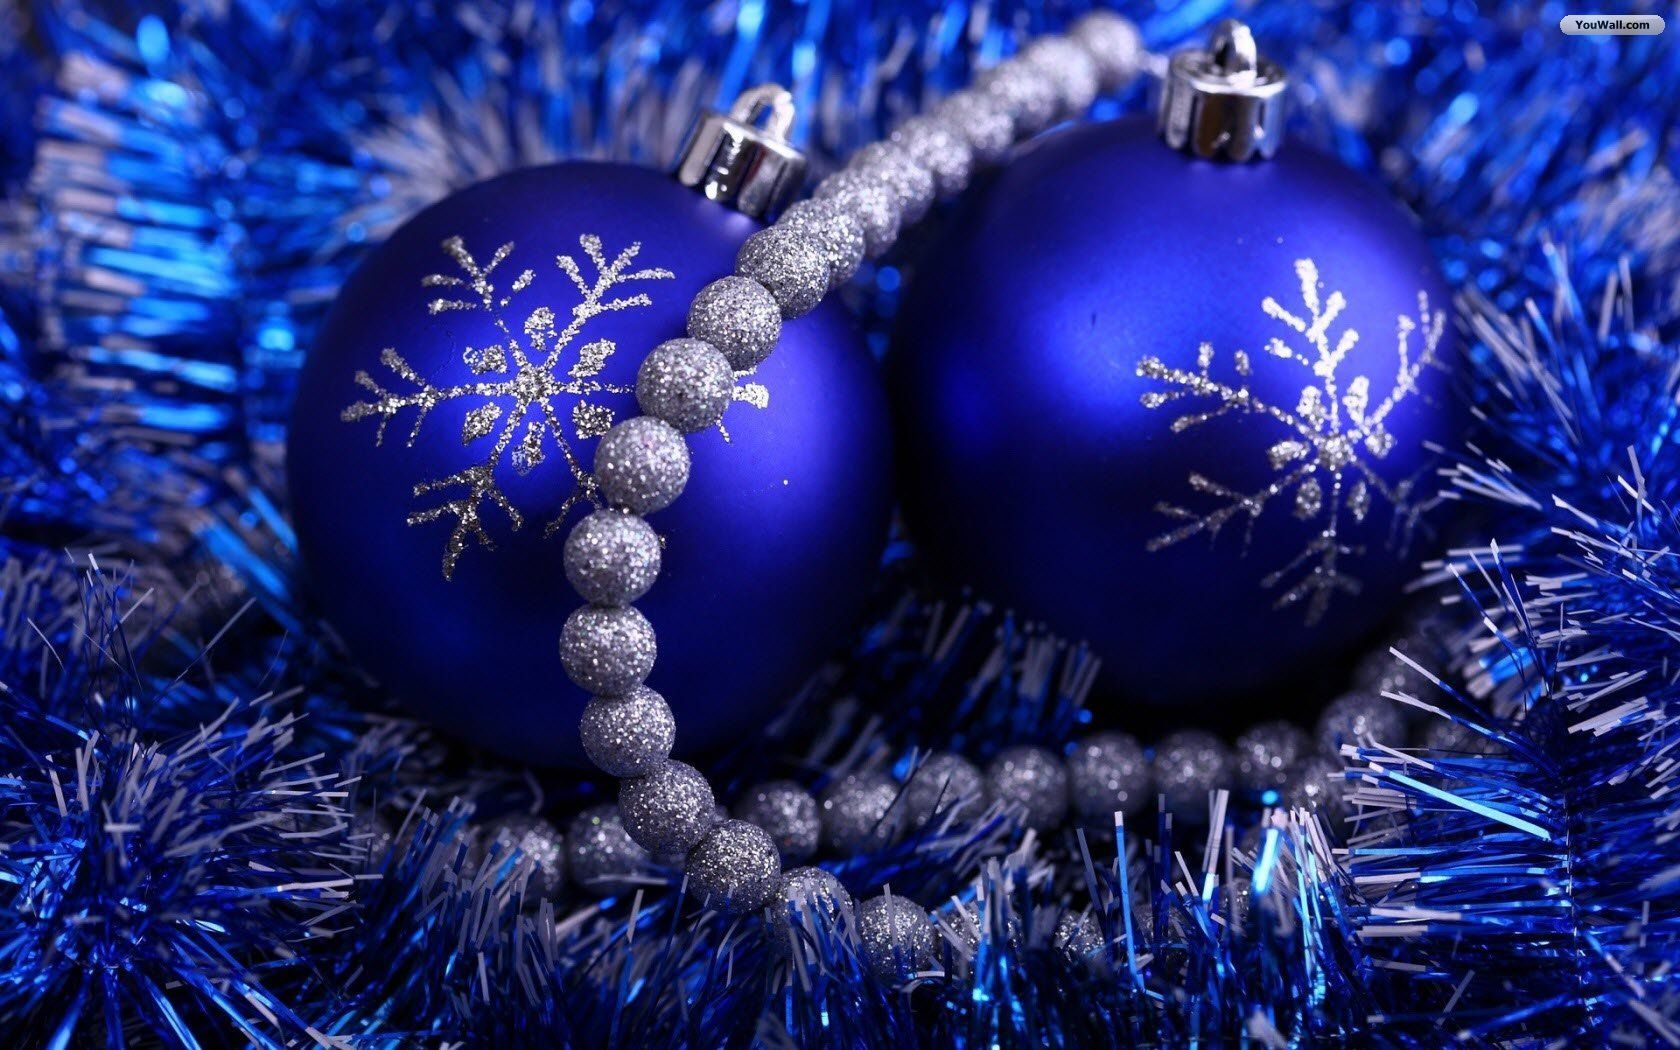 Christmas Decorations (1680×1050). Christmas Wallpaper Free, Winter Holiday Decorations, Blue Christmas Ornaments